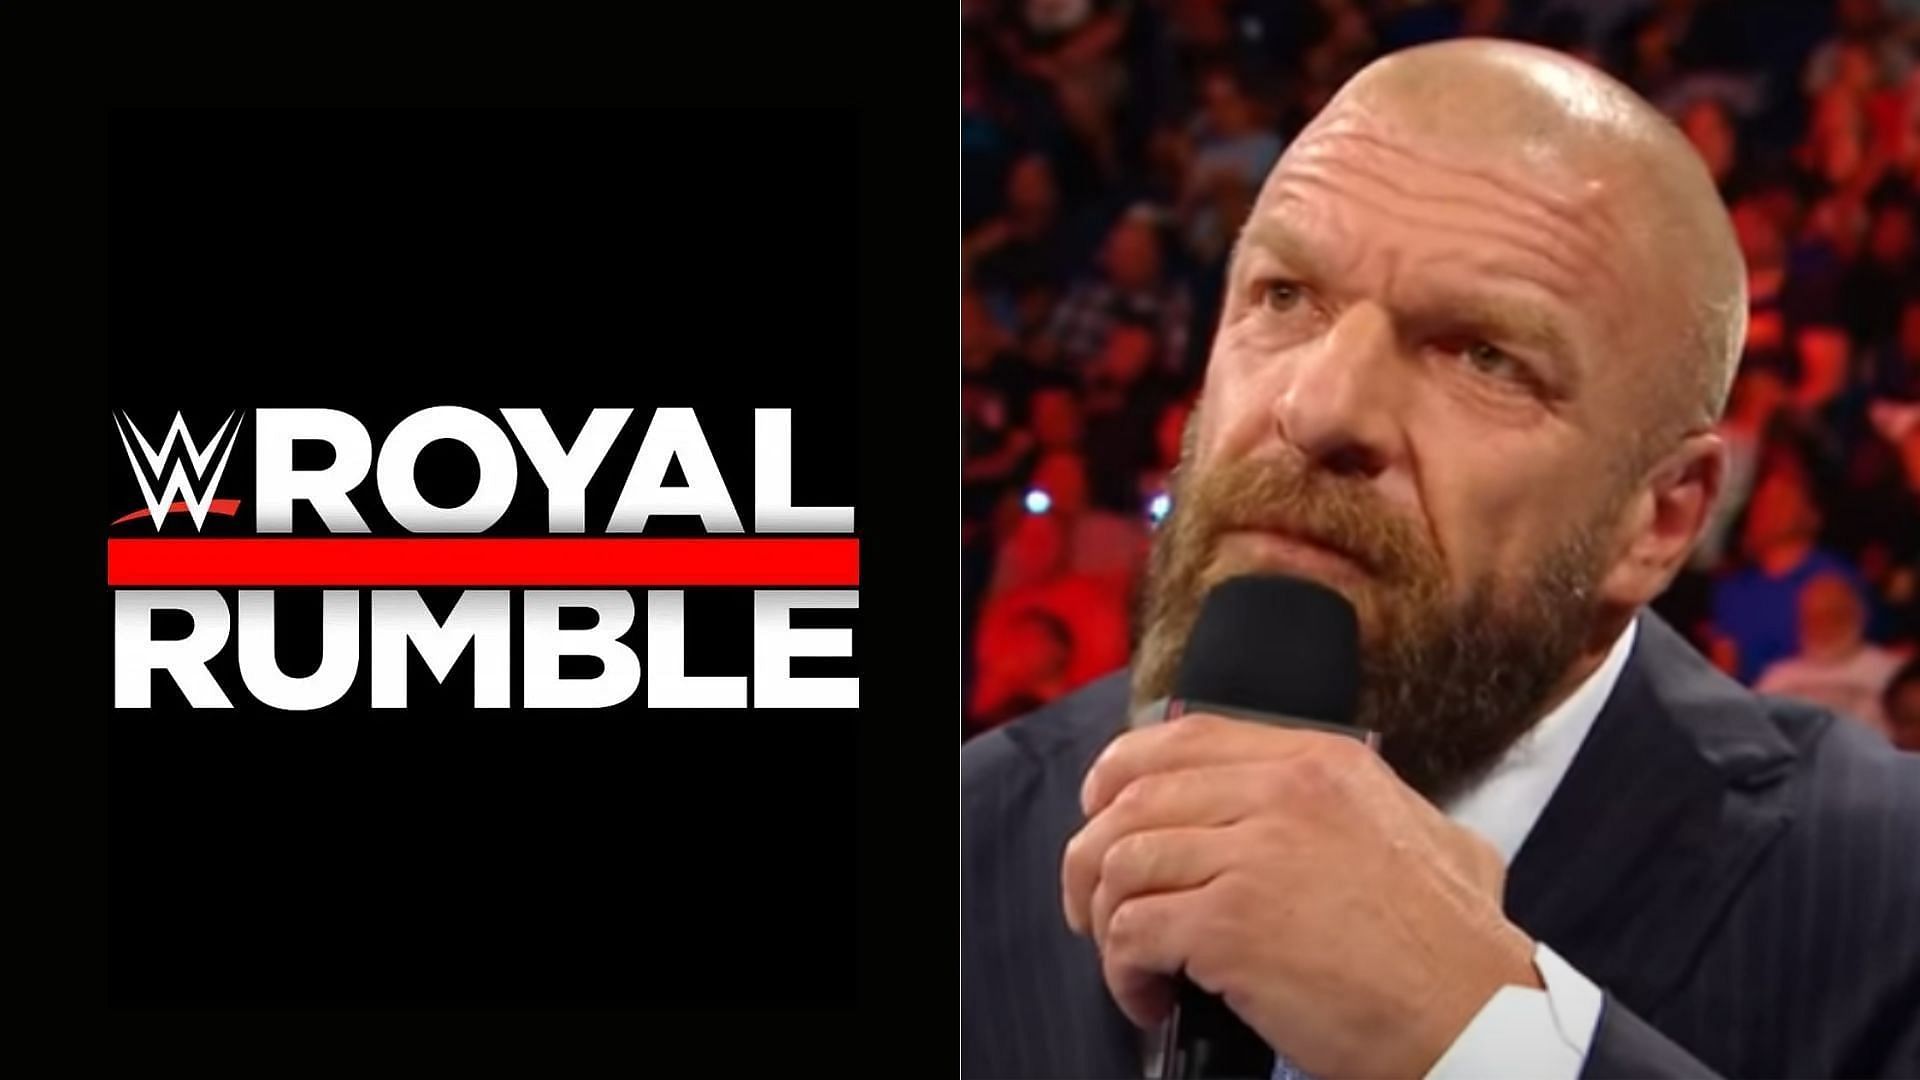 Triple H will book the 2023 Royal Rumble event.